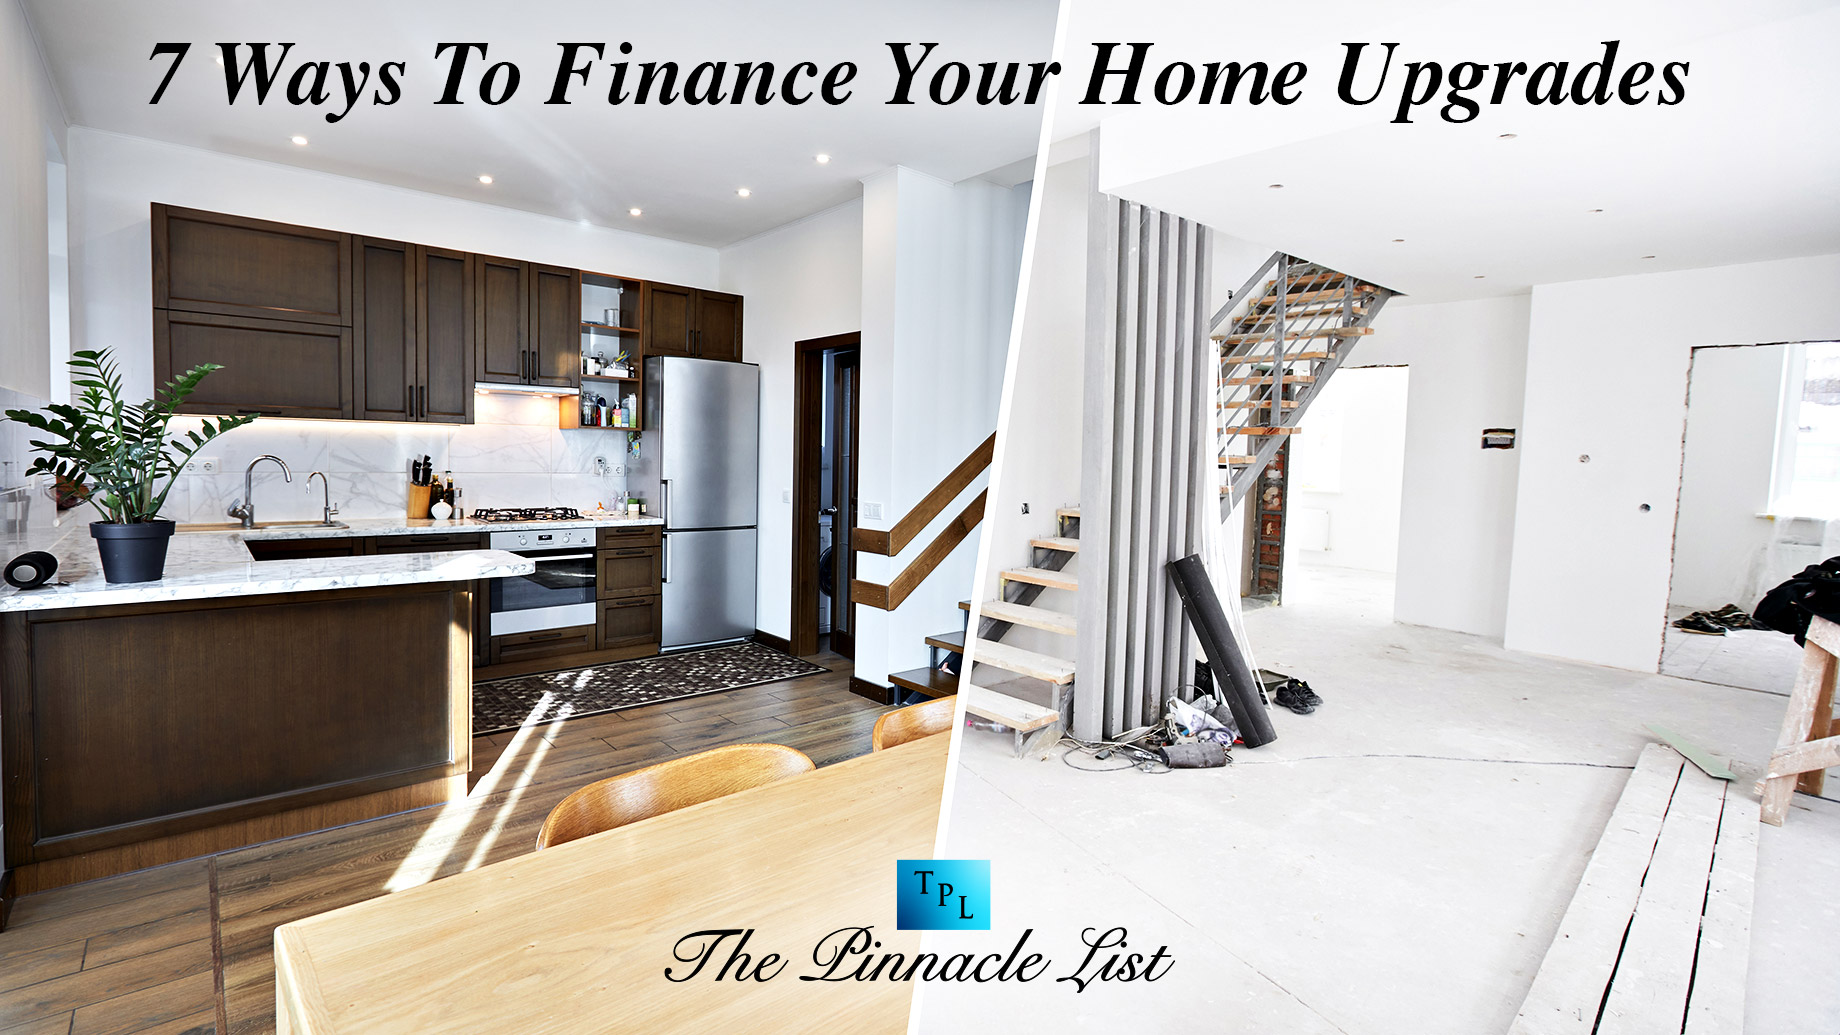 7 Ways To Finance Your Home Upgrades